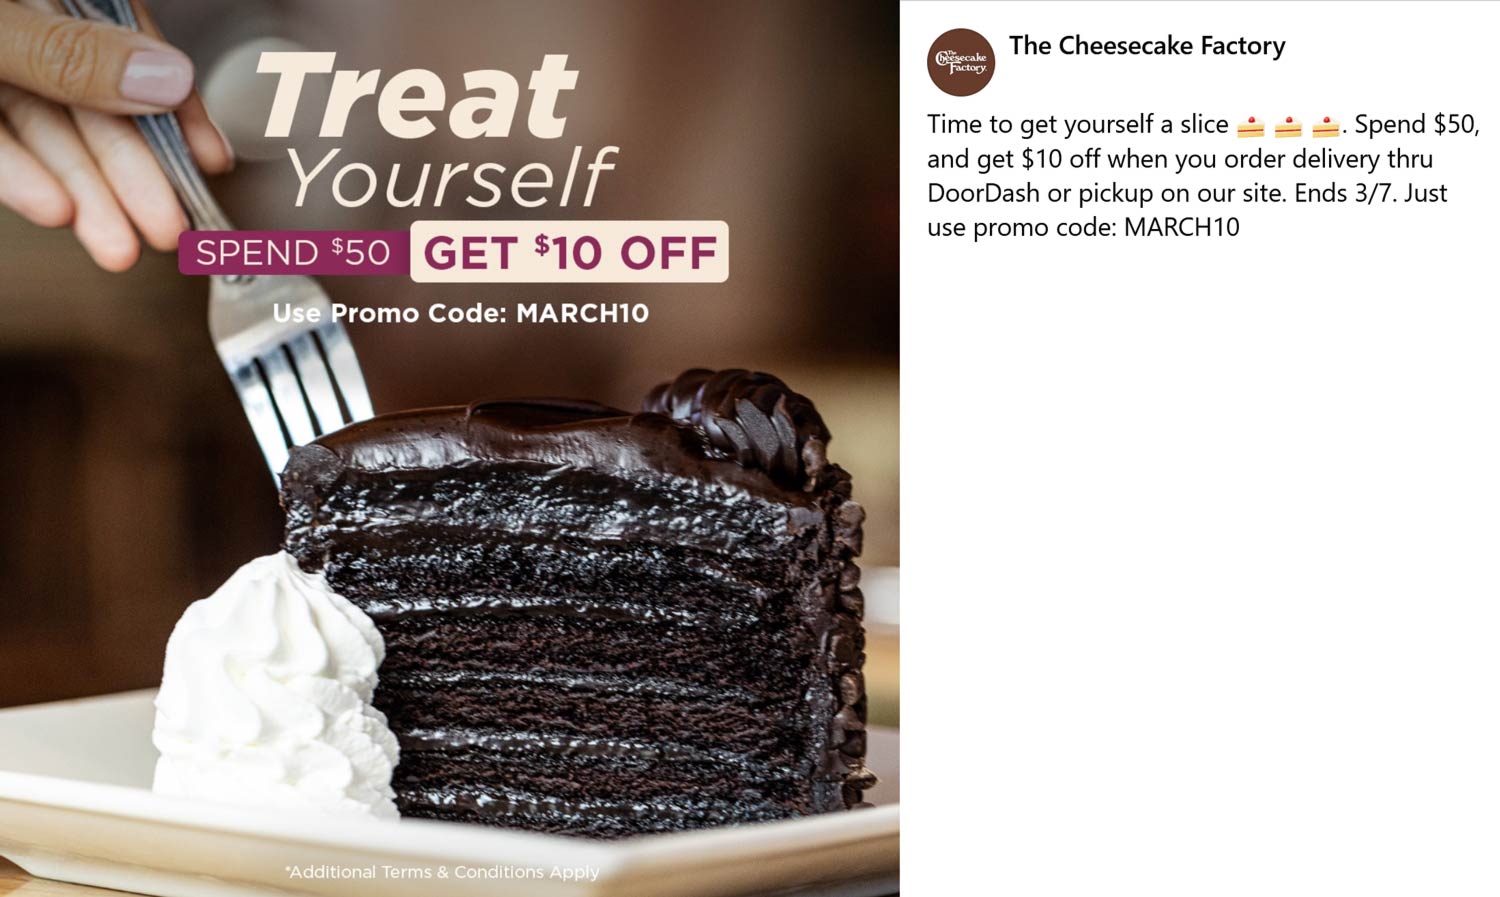 10 off 50 on delivery at The Cheesecake Factory via promo code